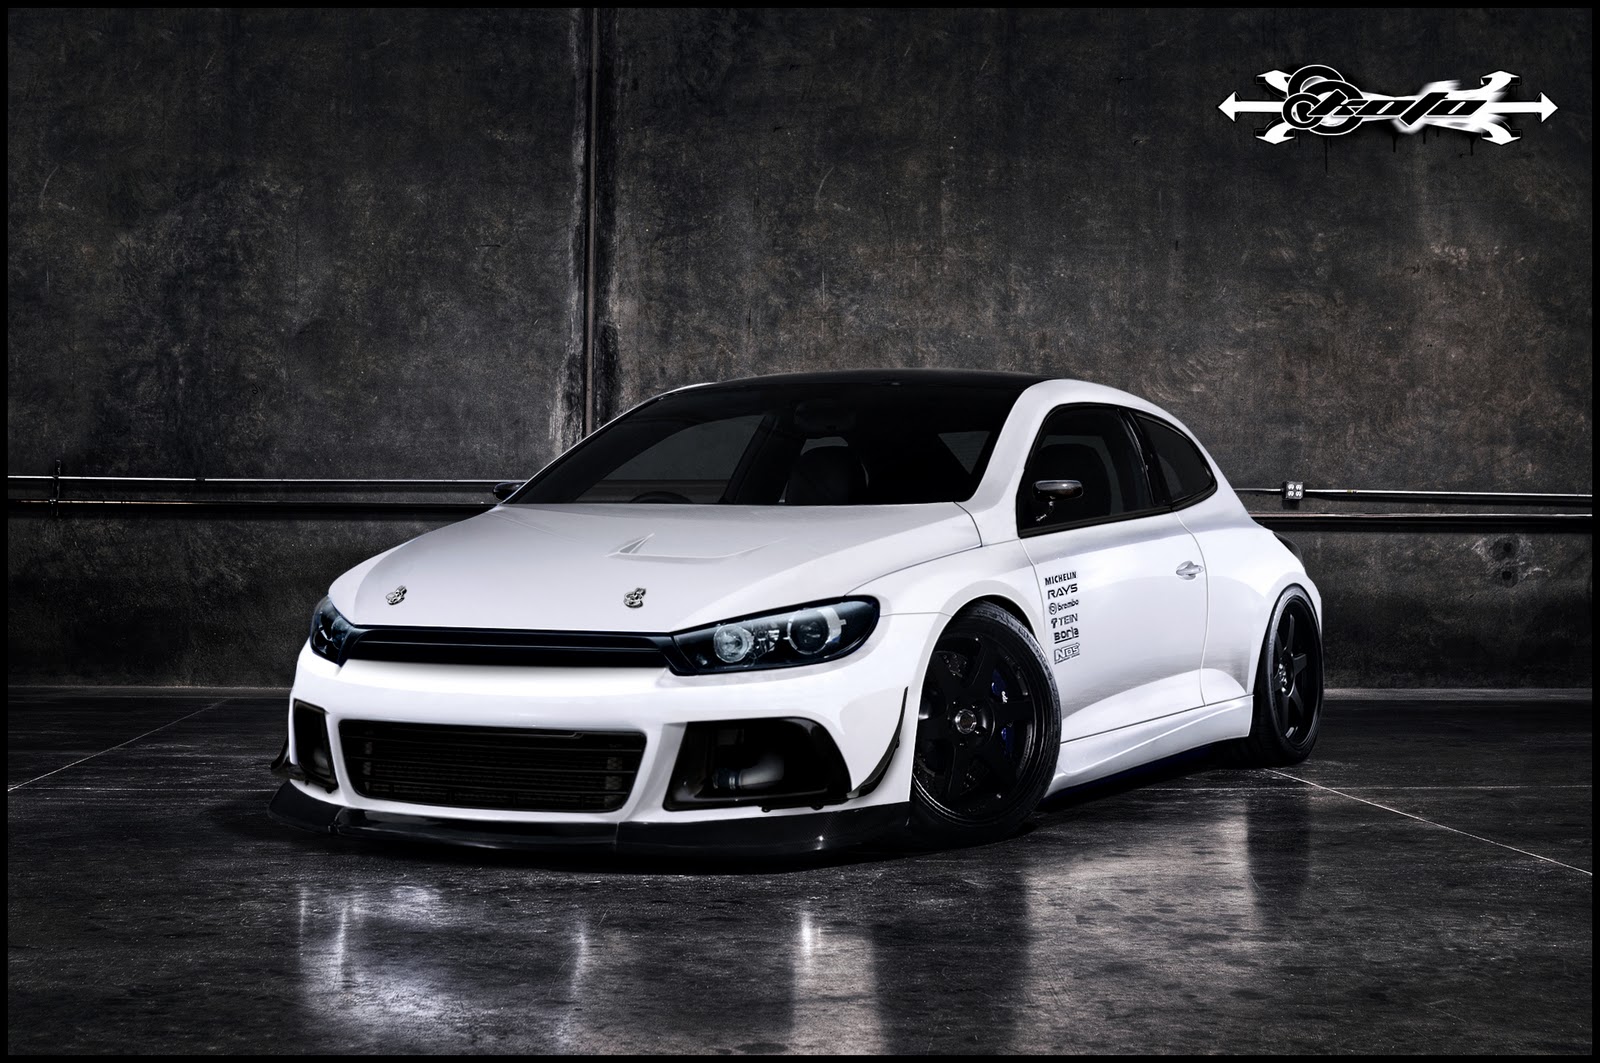 Free Cars HD Wallpapers Volkswagen Scirocco Tuning Car HD 1600x1063